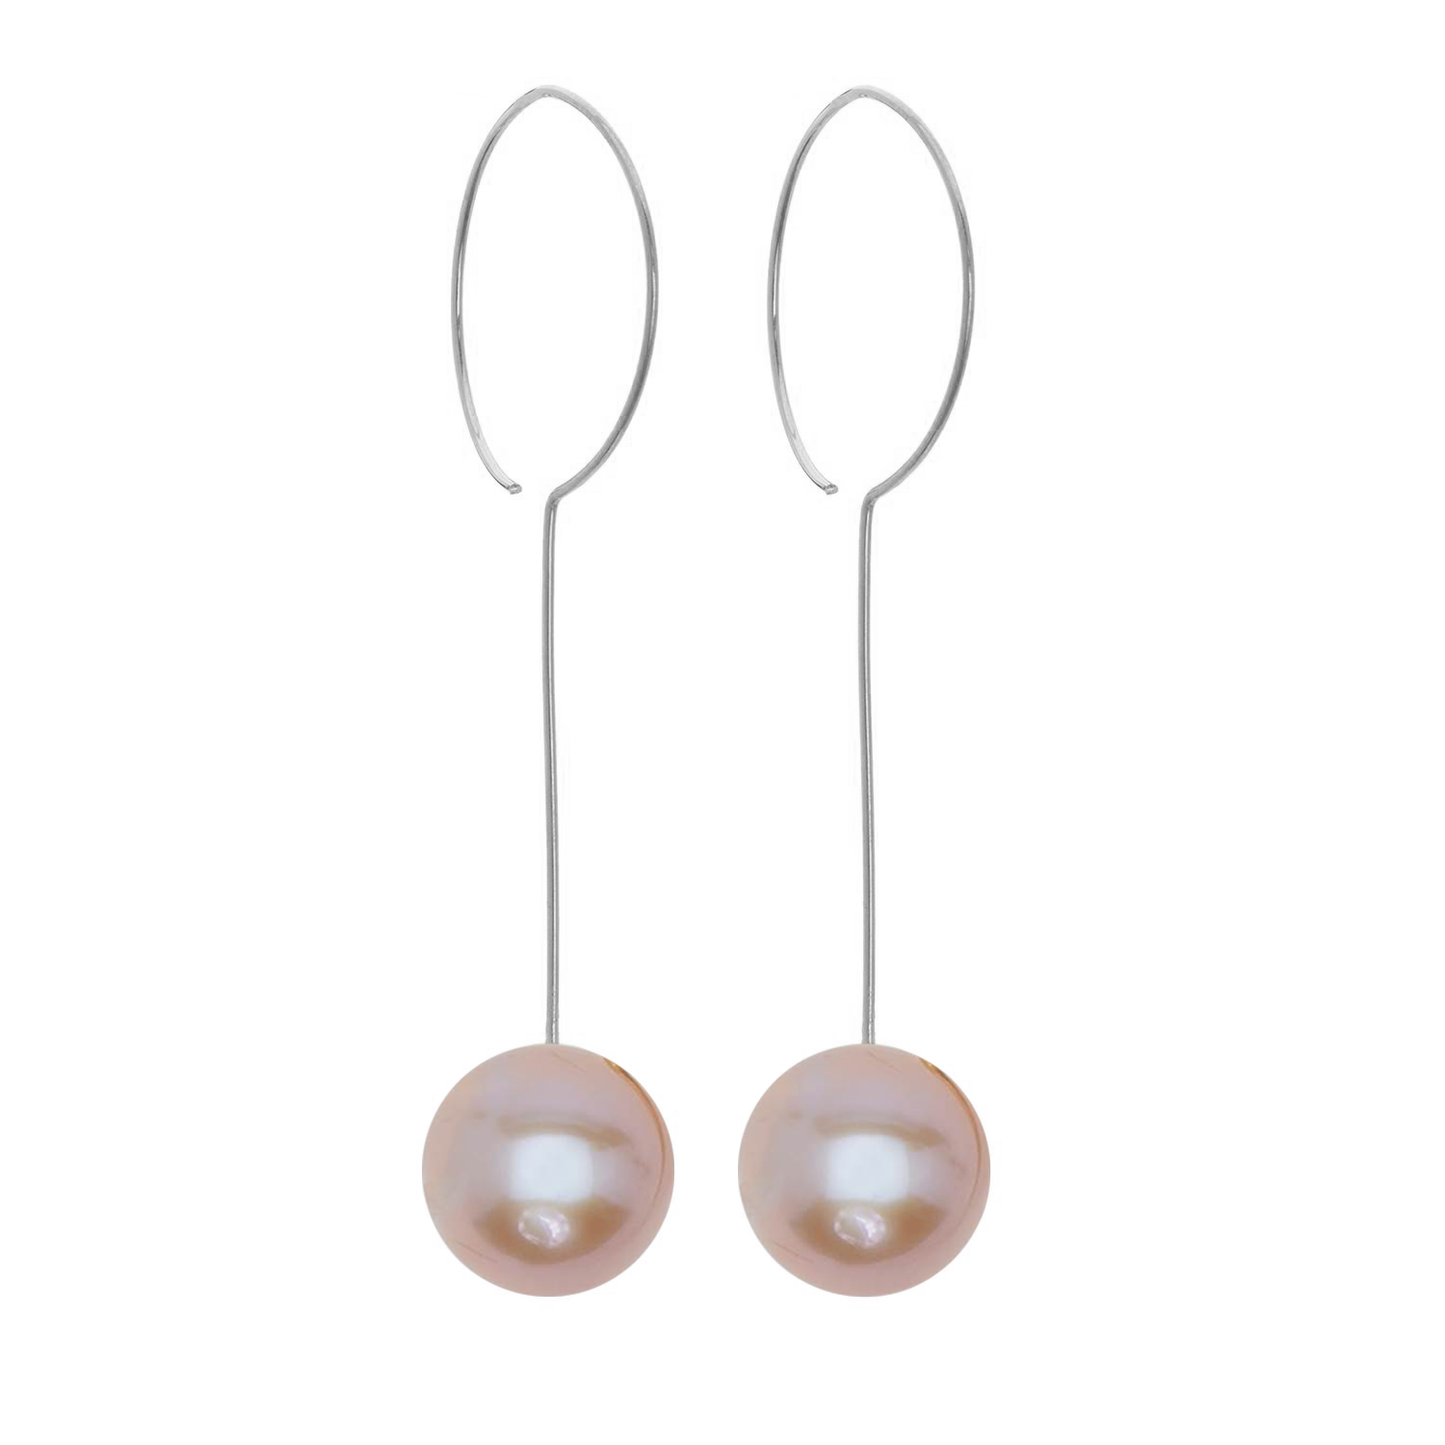 Long Drop Earrings with Round Freshwater Pearls (12mm)